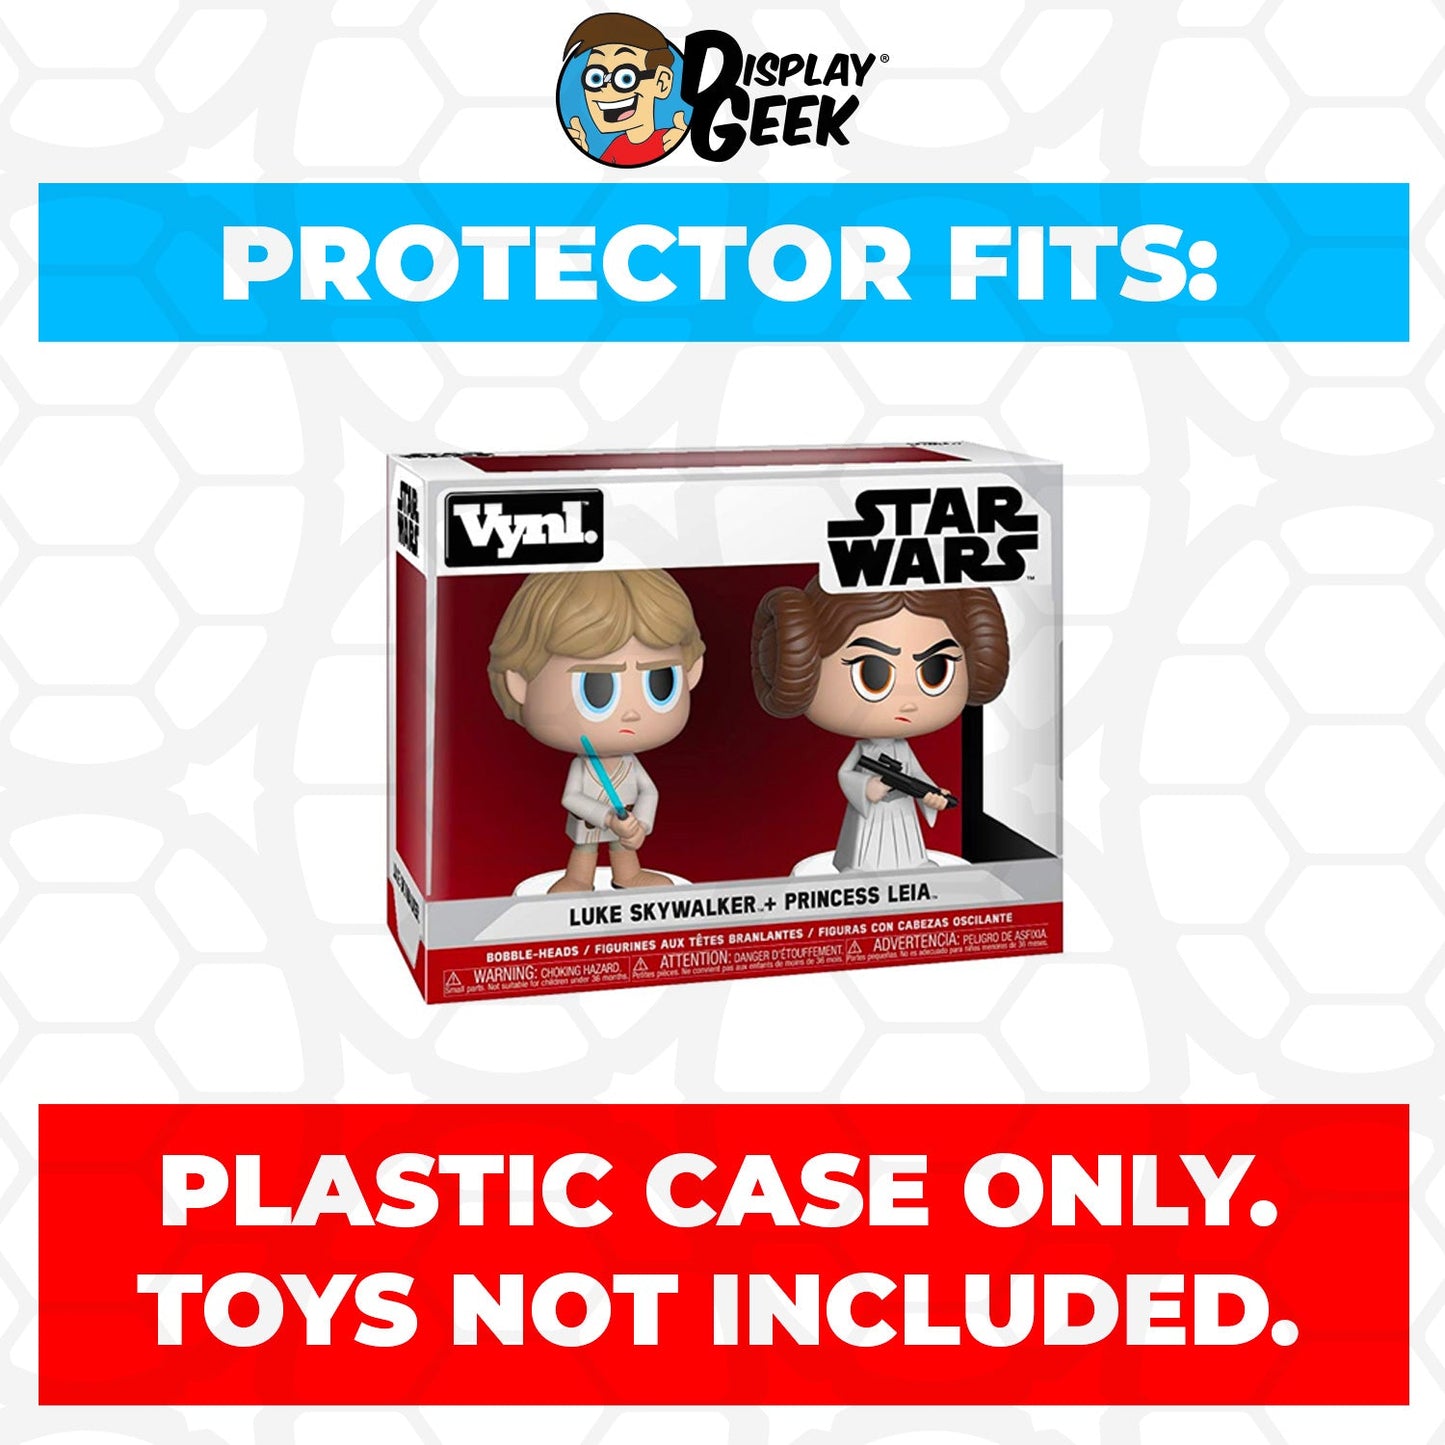 Pop Protector for Vynl 2 Pack Luke Skywalker & Princess Leia Funko - PPG Pop Protector Guide Search Created by Display Geek